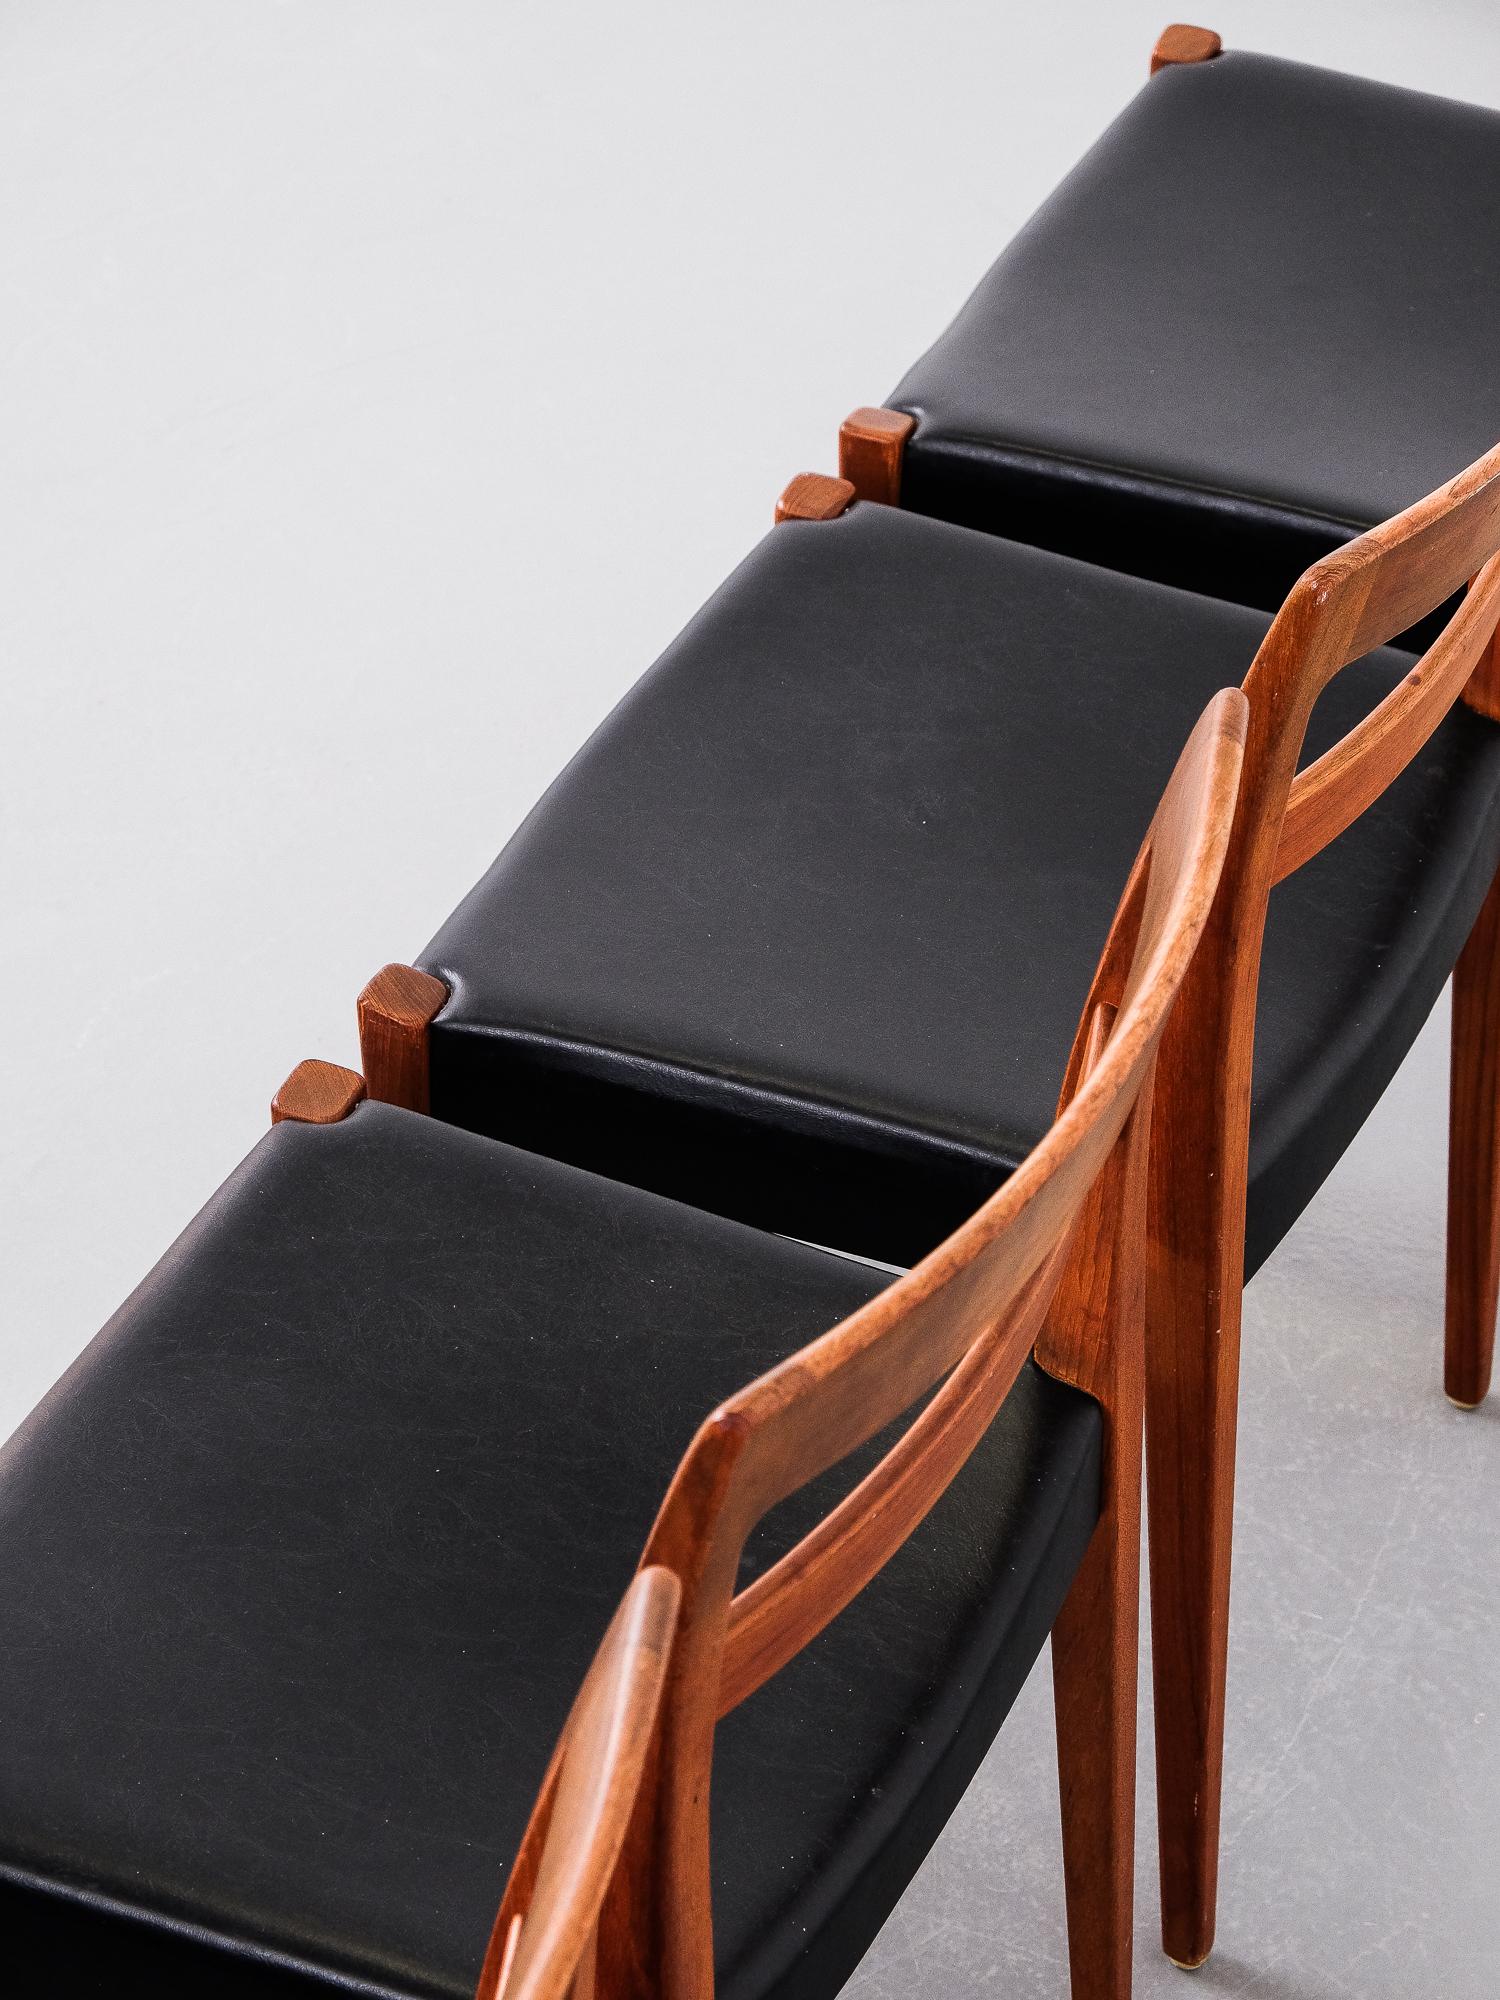 Mid-20th Century ”Garmi” Teak Dining Chairs by Nils Jonsson for Troeds, Set of 4